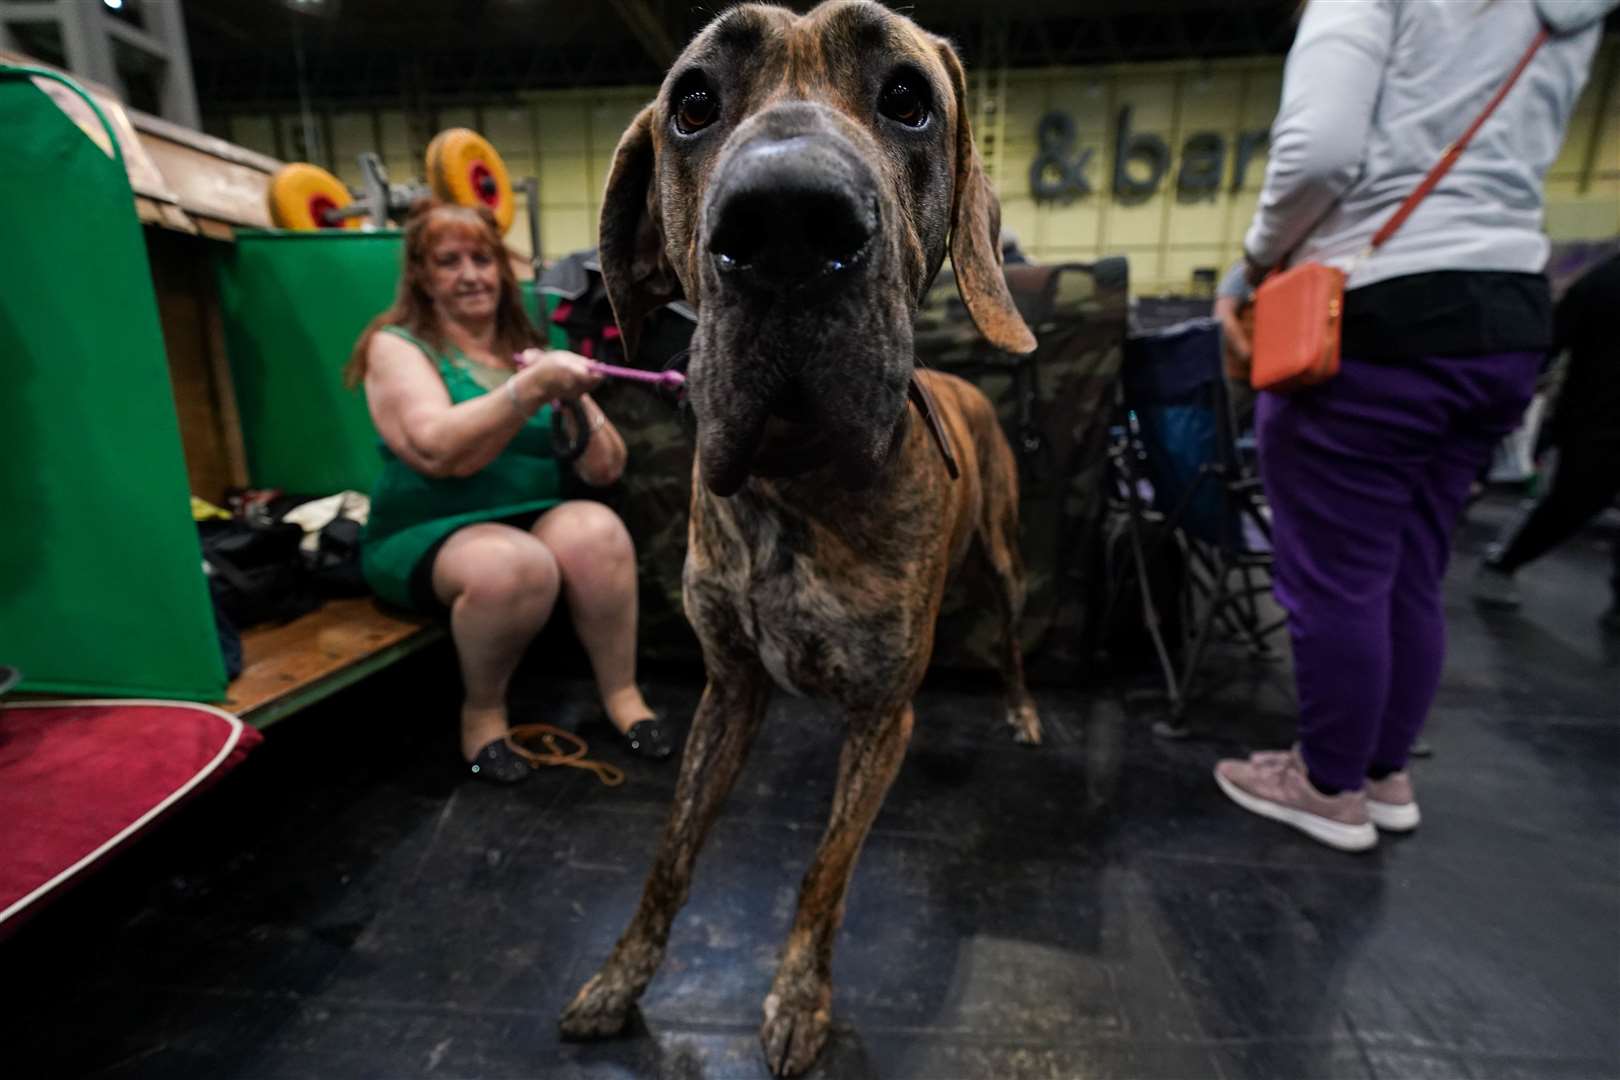 A Great Dane hogs the camera as it waits to go into the show ring (Jacob King/PA)